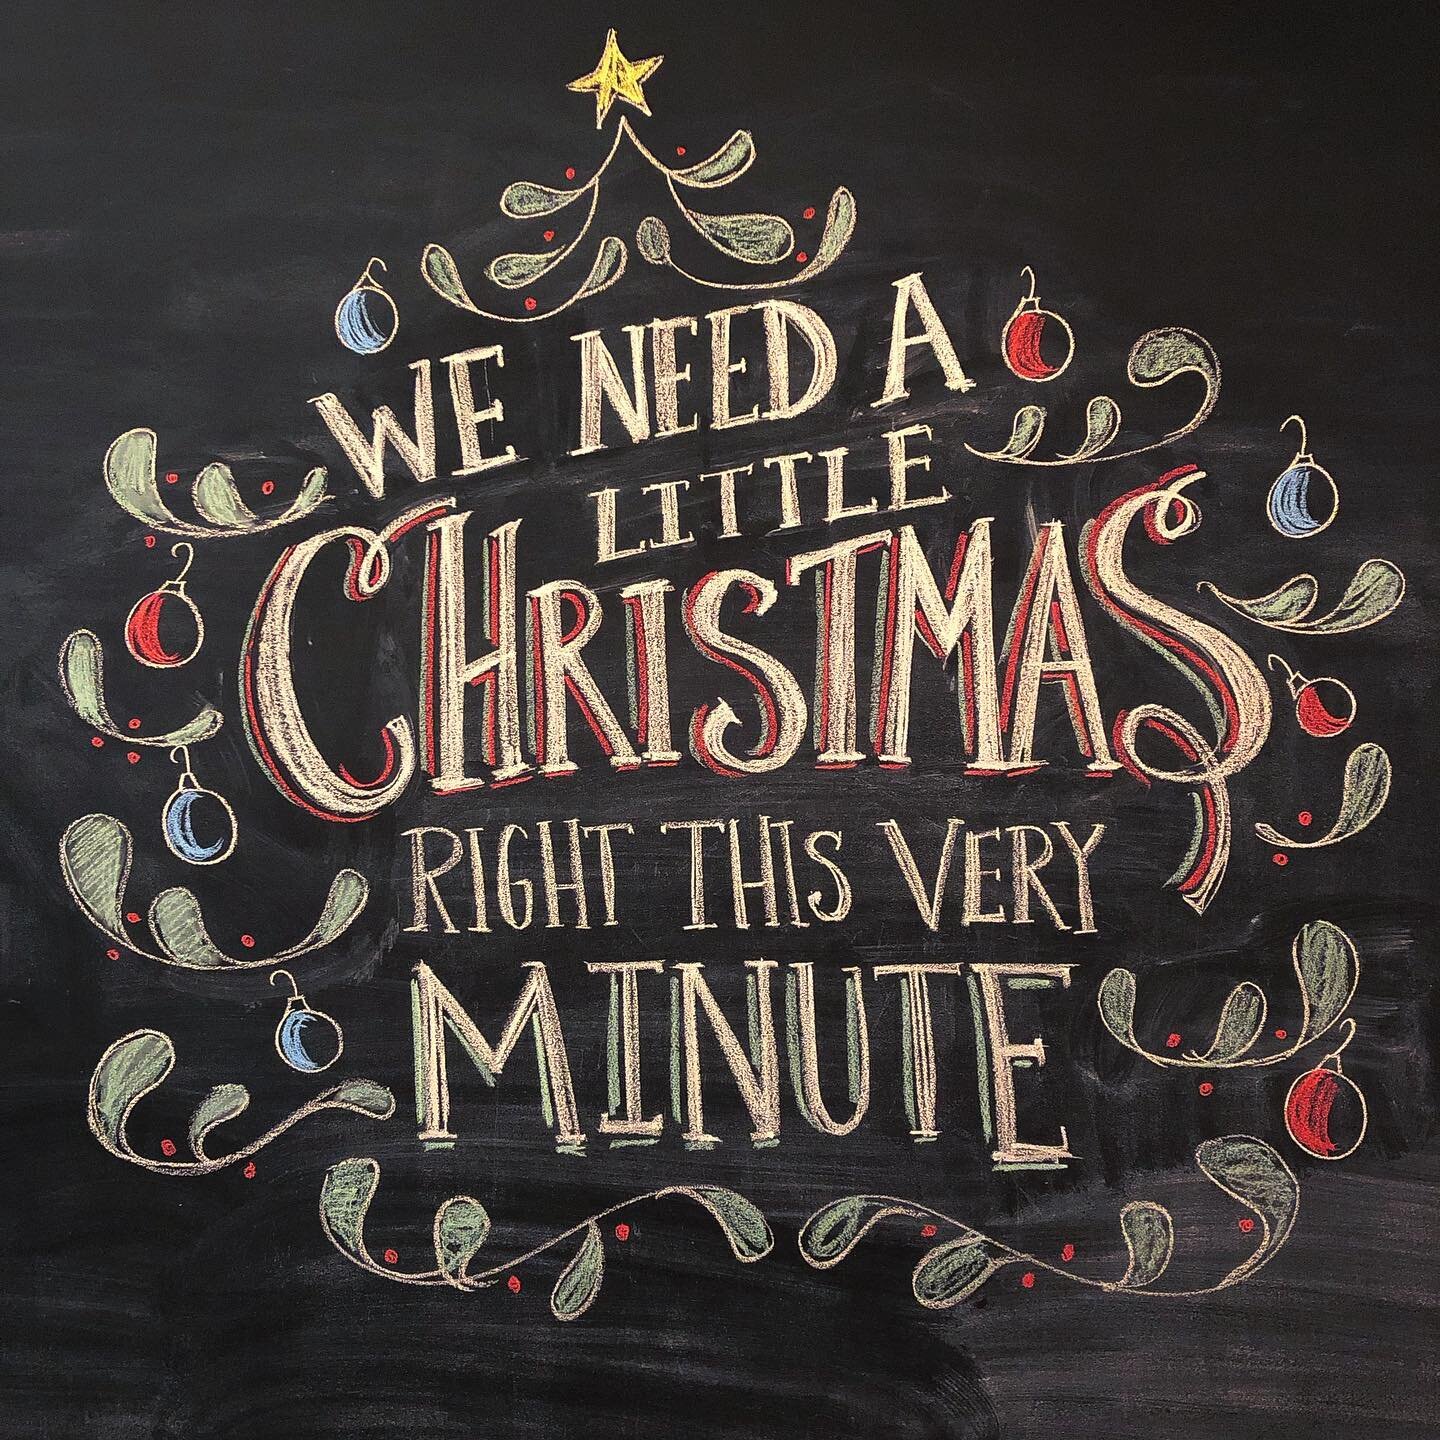 🎶We need a little Christmas right this very minute🎶 #chalkboardart ✨🎄✨